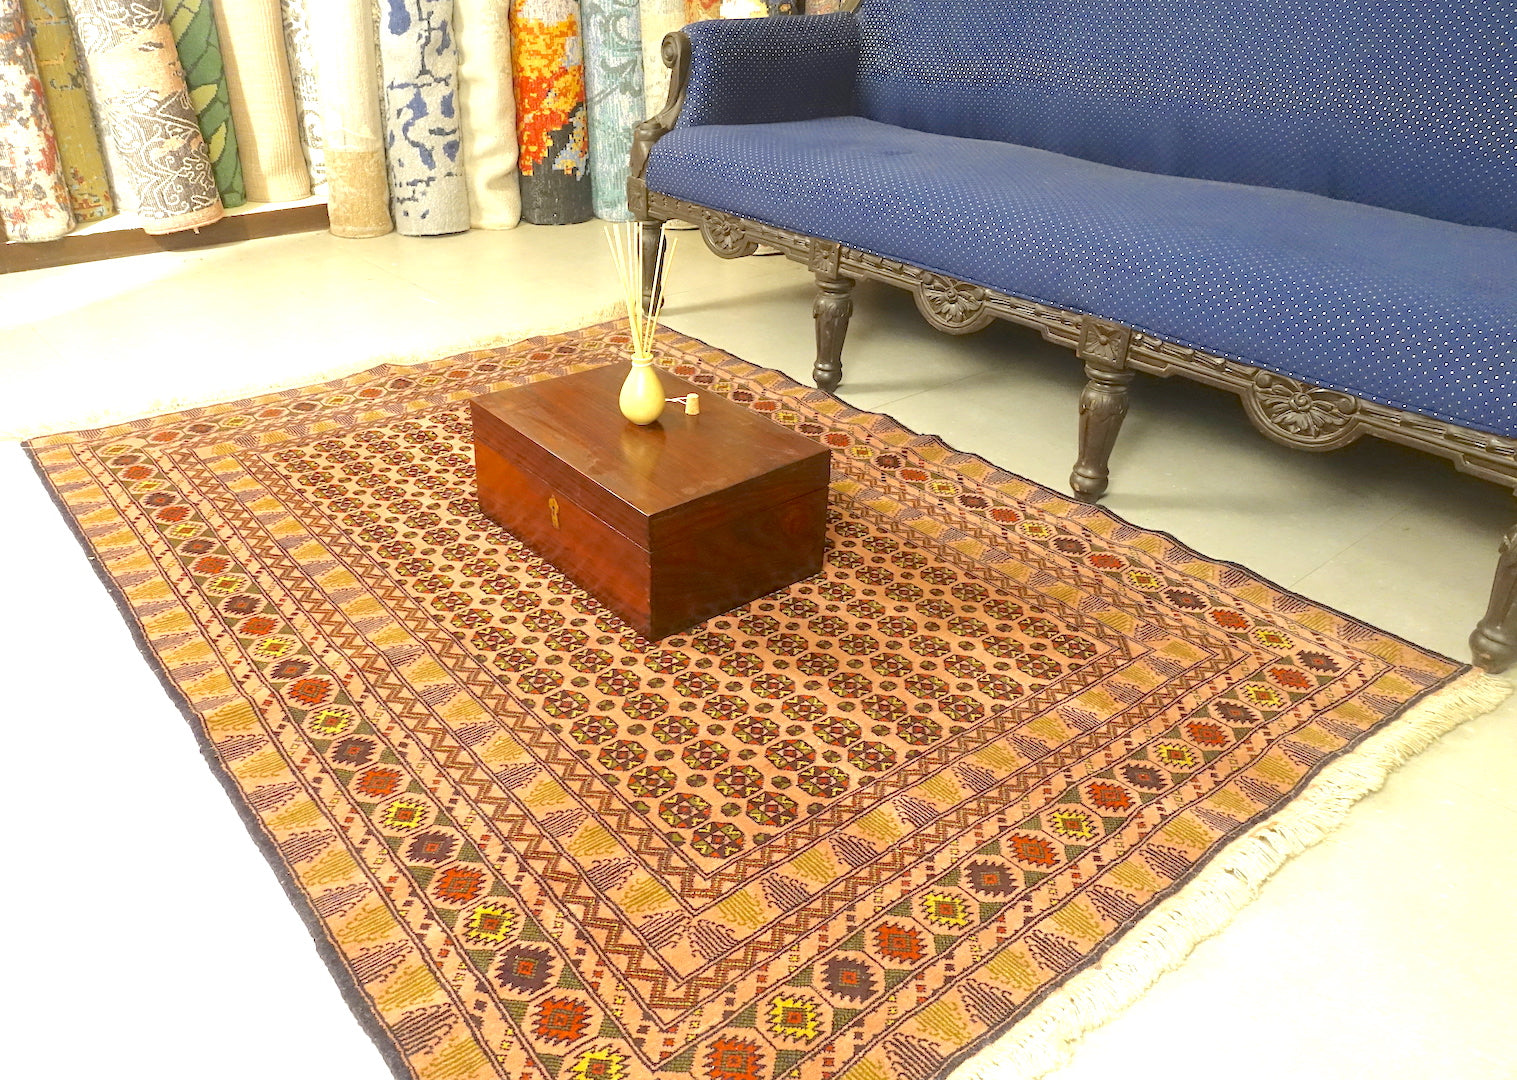 A 4 feet by 6 feet Afghan wool rug, the colours used on the rug are beige,yellow,gree,brown and rust.